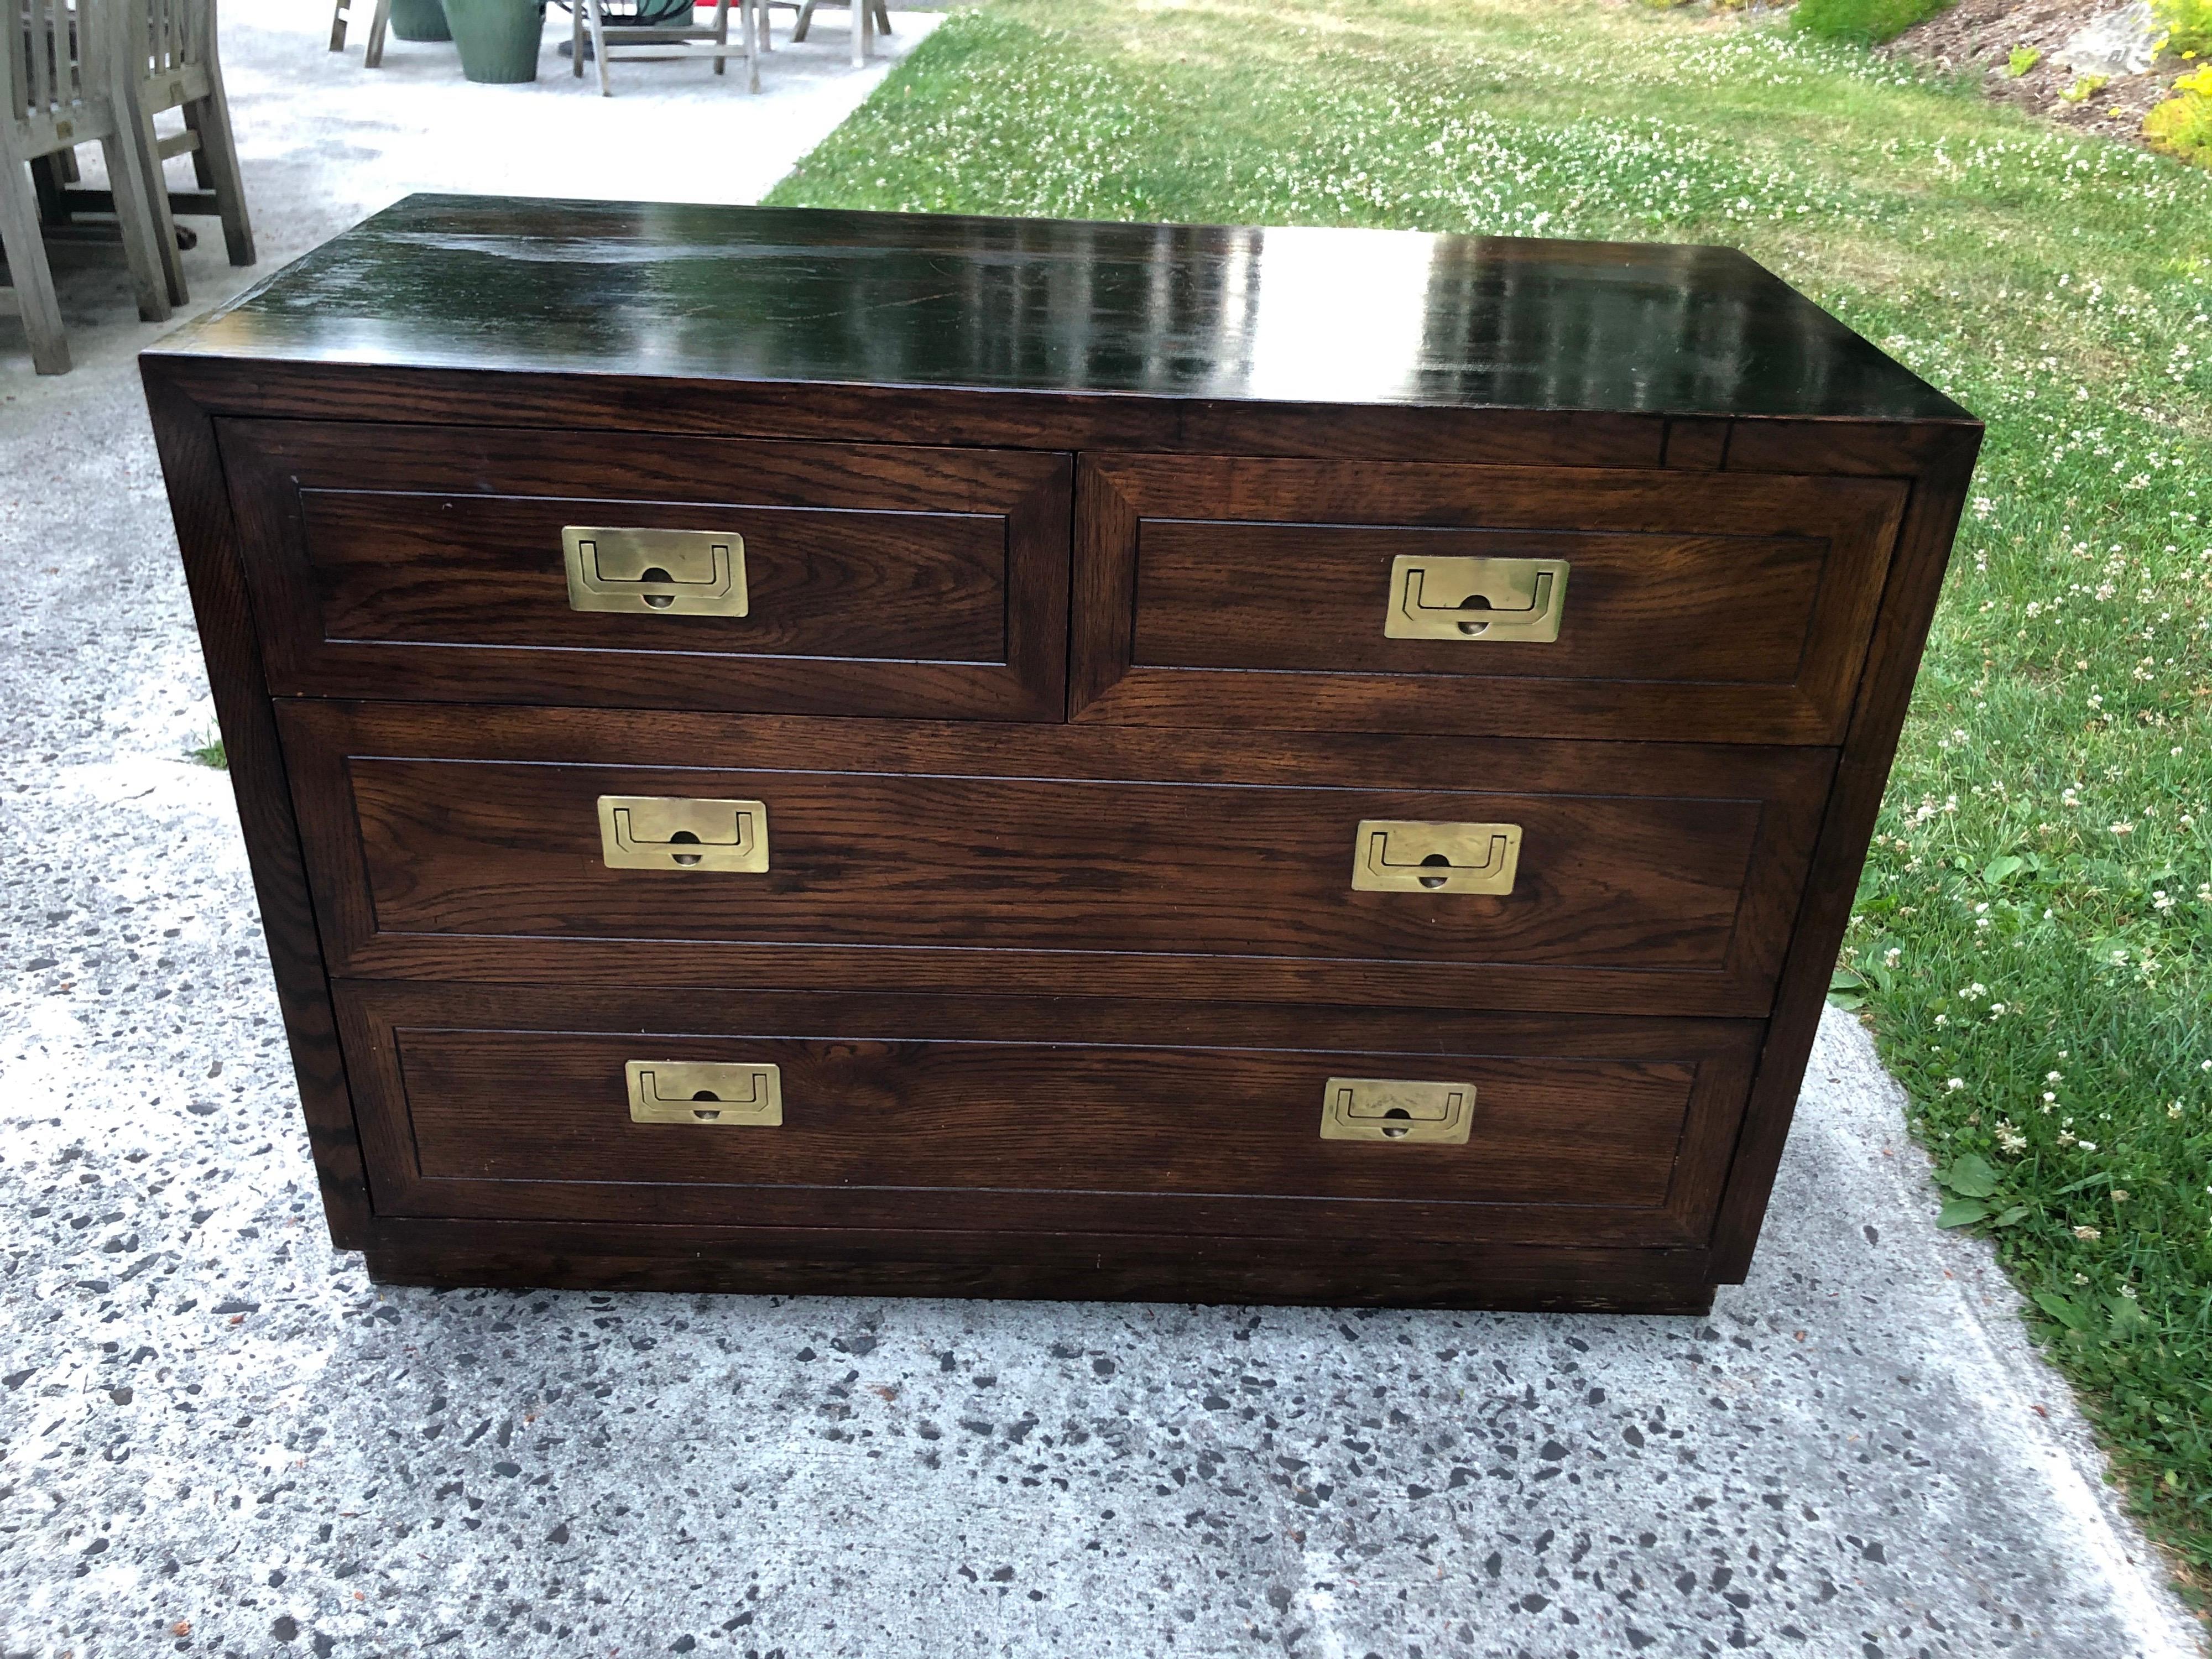 Henredon Campaign chest of drawers. Painted ebonized top which can be stripped or redo the whole thing in a bright color. Solid wooden well made timeless piece of furniture. Other ideas: Use as a bathroom vanity with a top mounted vessel sink. Or